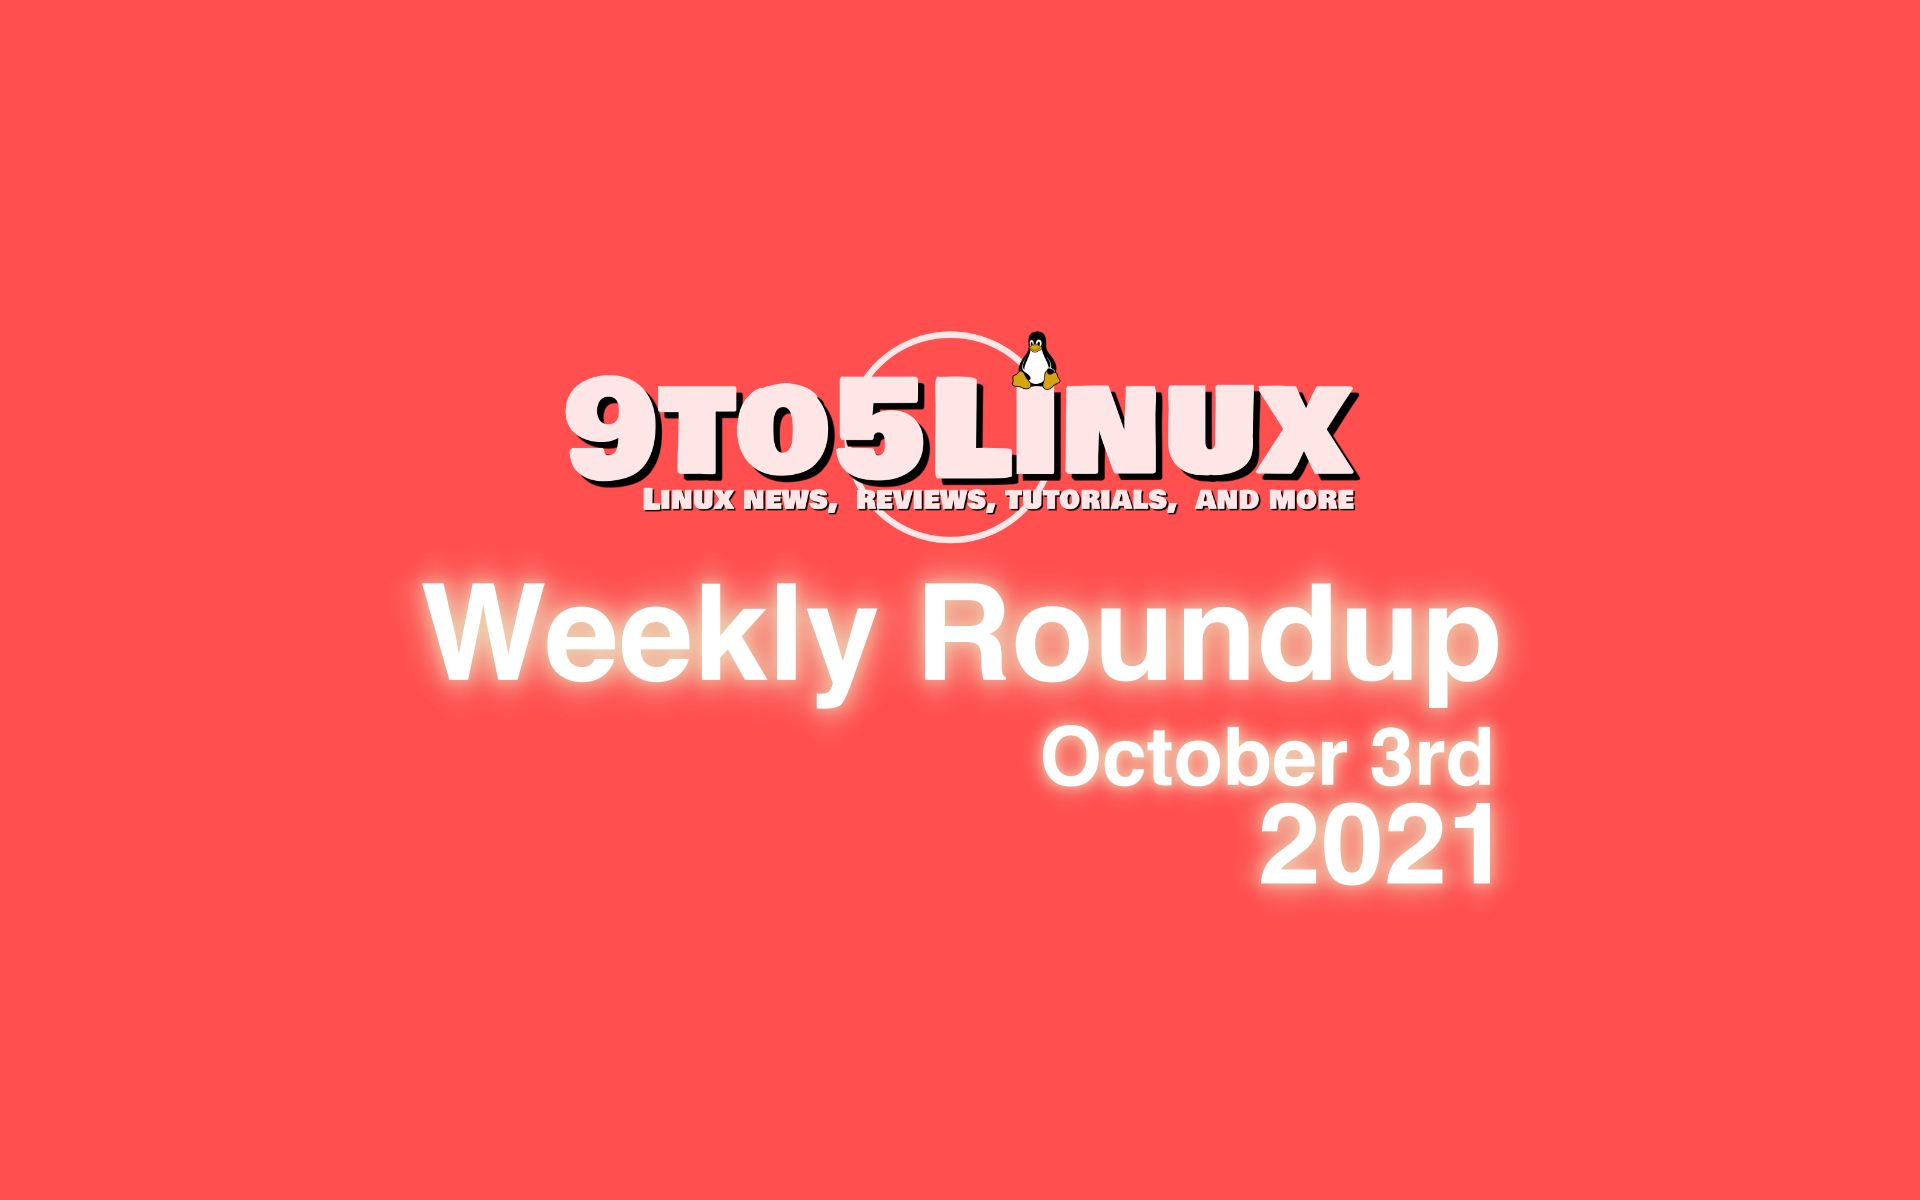 9to5Linux Weekly Roundup: October 3rd, 2021